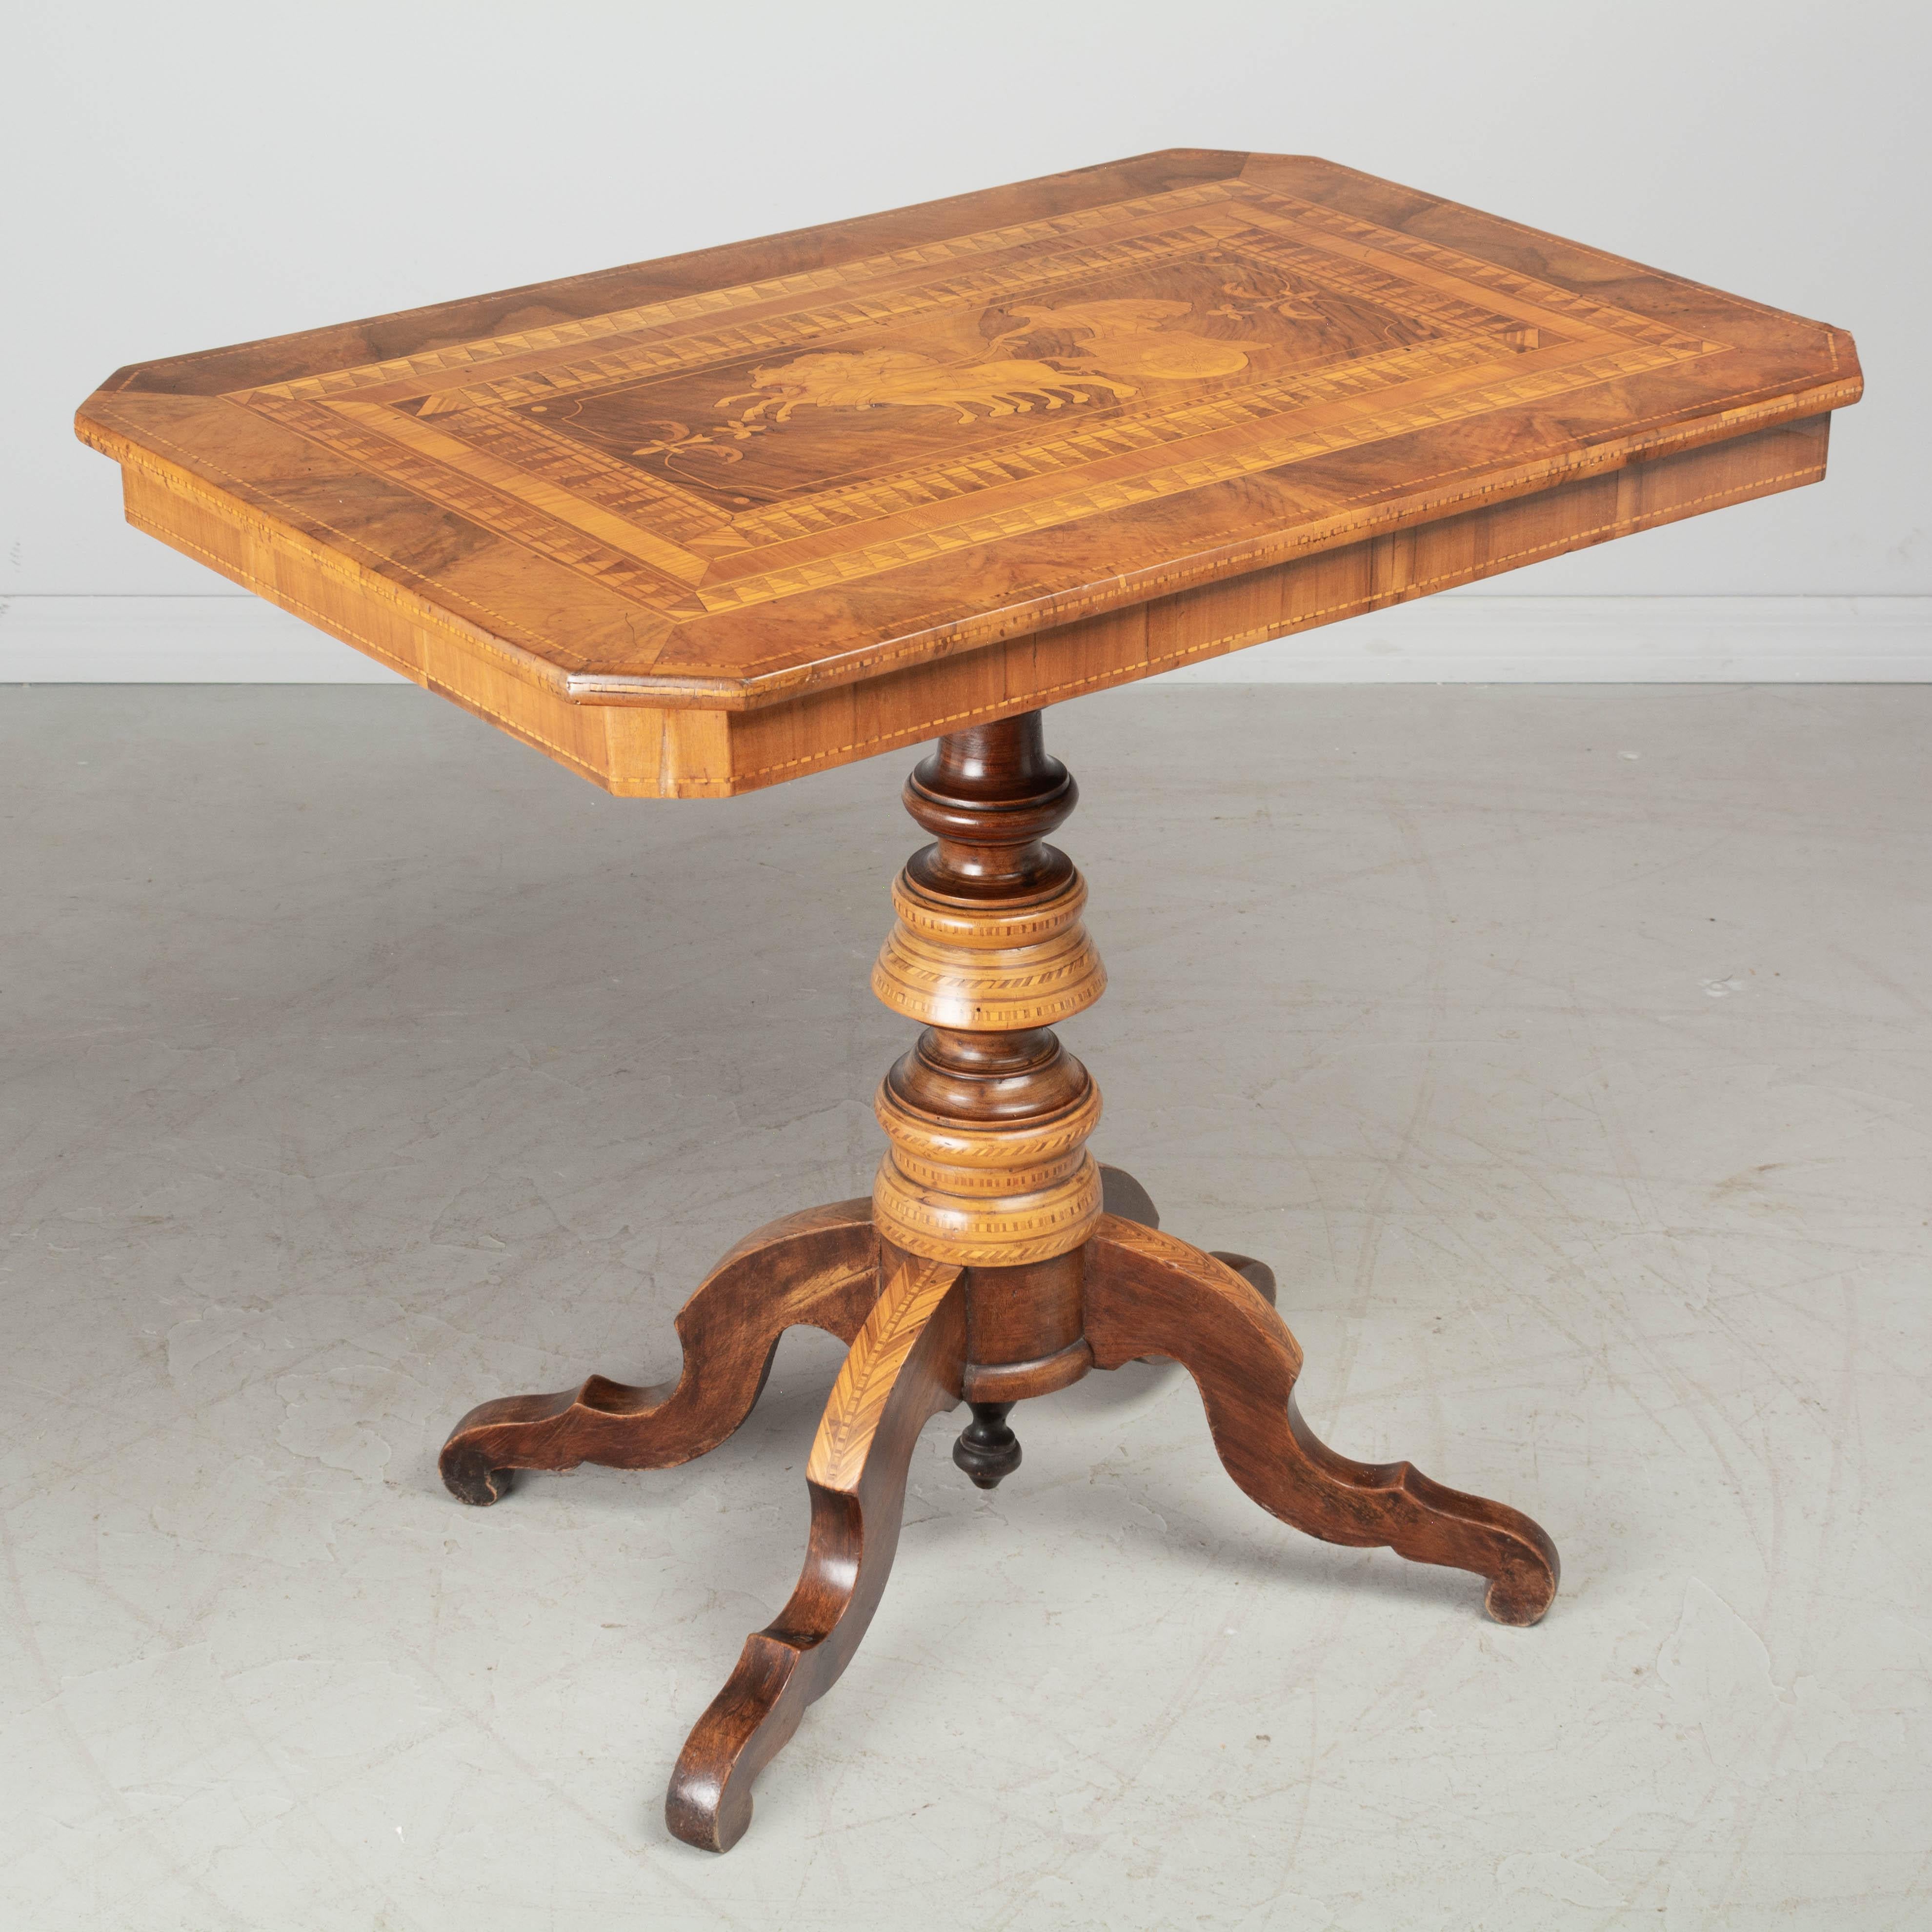 A 19th Century Italian marquetry tilt-top center table made of solid walnut with inlaid veneers of walnut and various woods. Marquetry top with Neoclassical imagery of The Sun Chariot surrounded by an elaborate decorative border. Sturdy turned